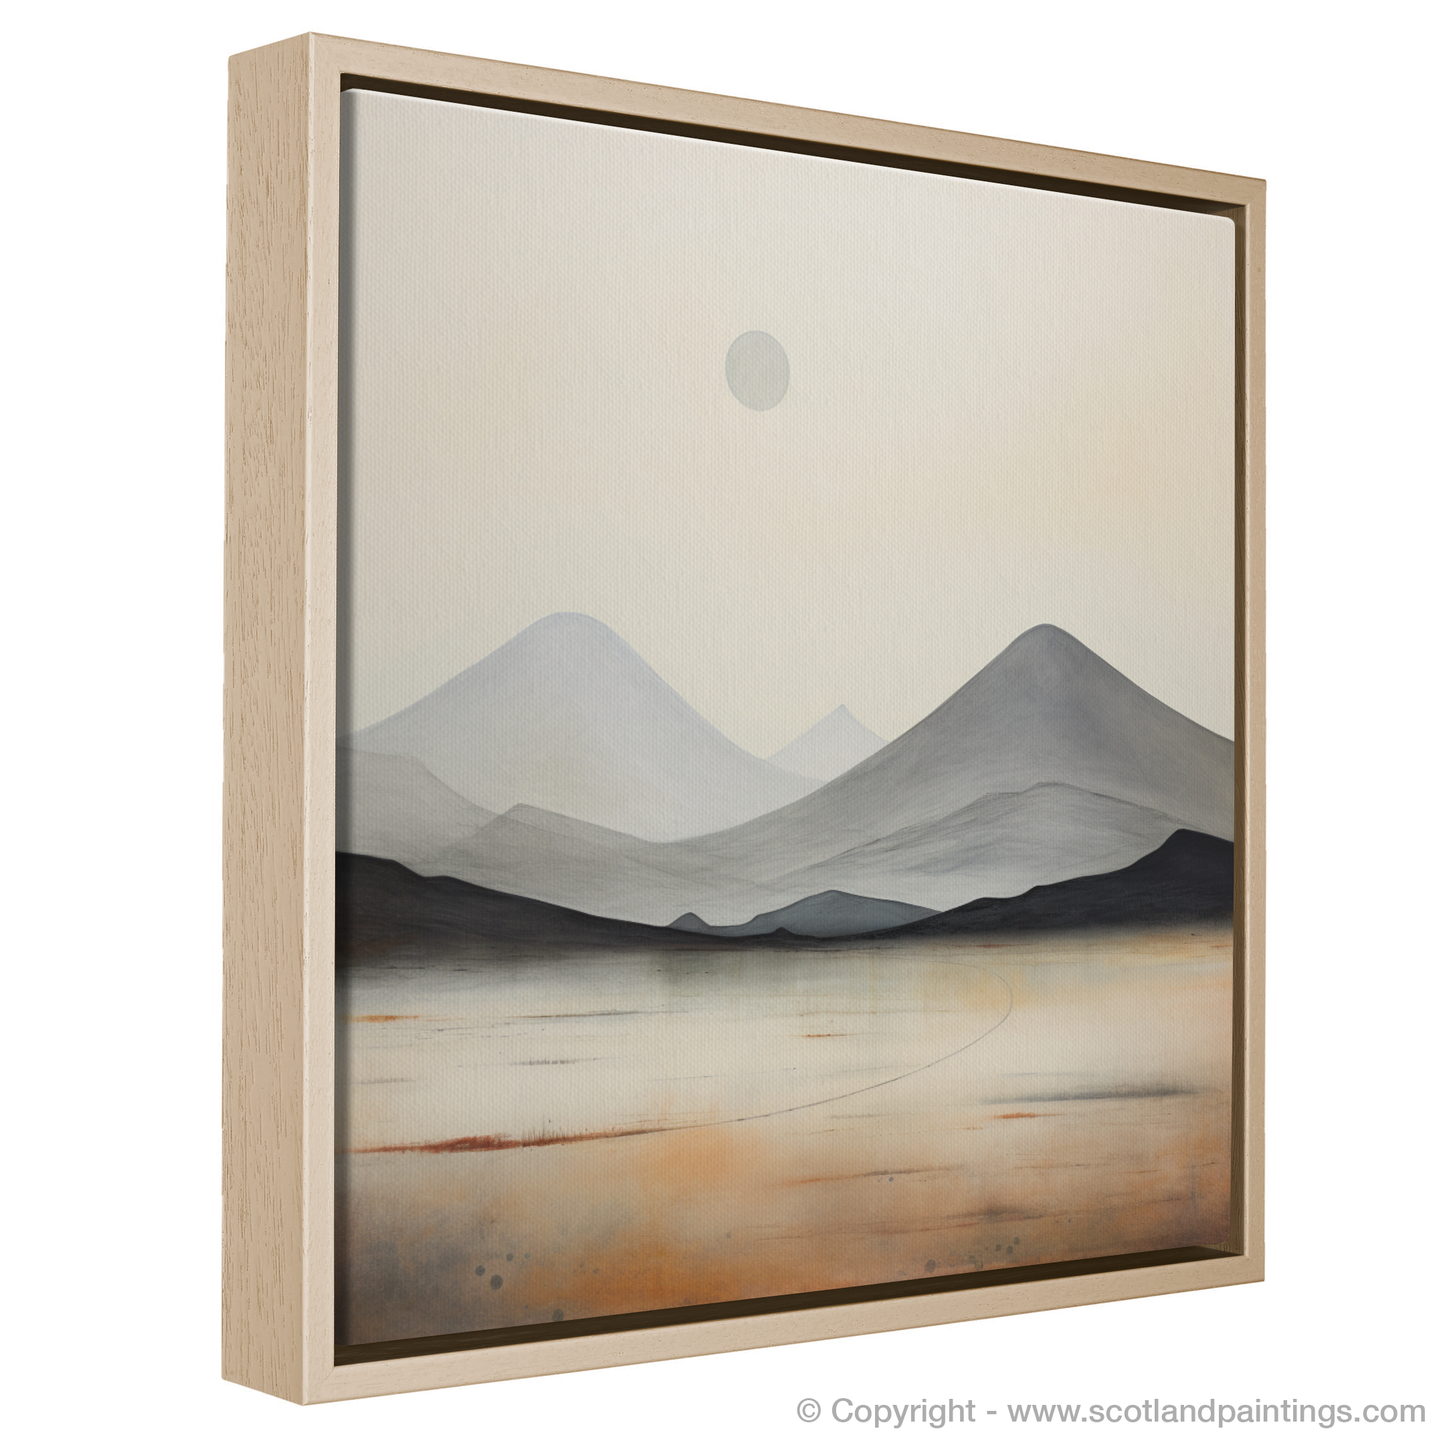 Painting and Art Print of Meall Greigh entitled "Highland Serenity: An Abstract Ode to Meall Greigh".